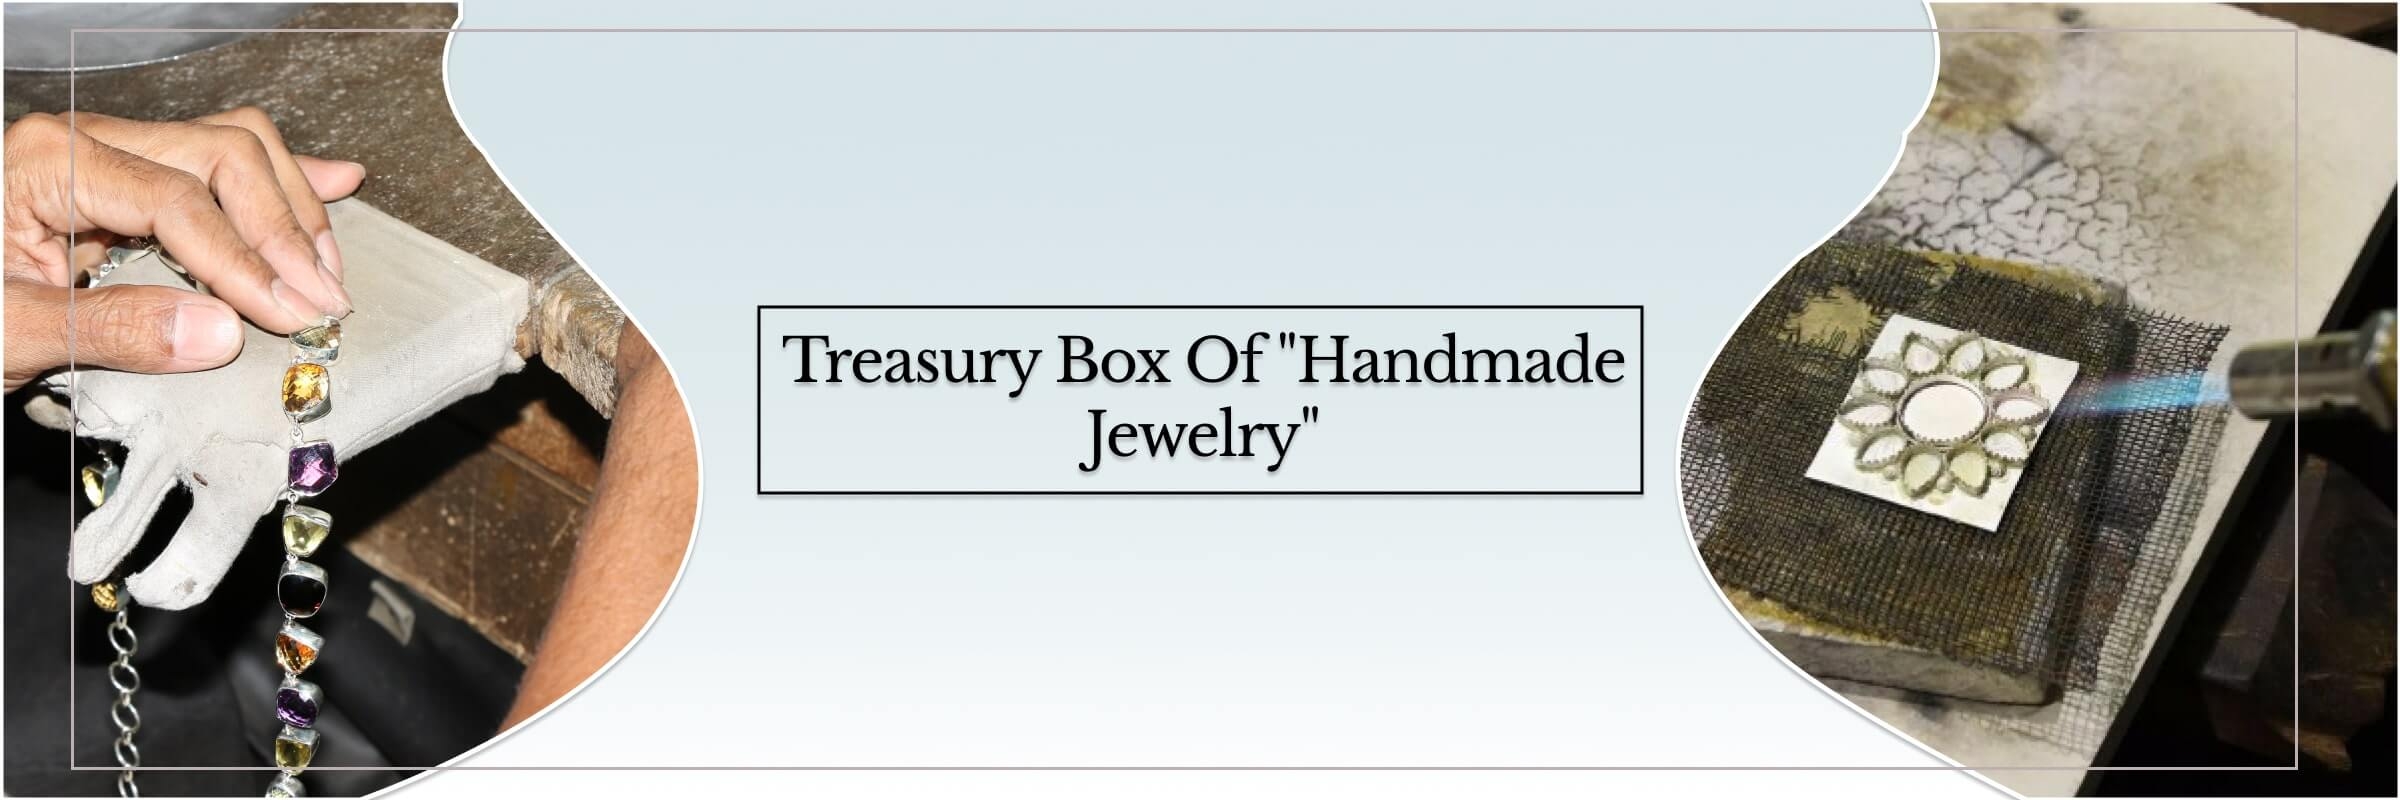 Everything You Want to Know About Handmade Jewelry